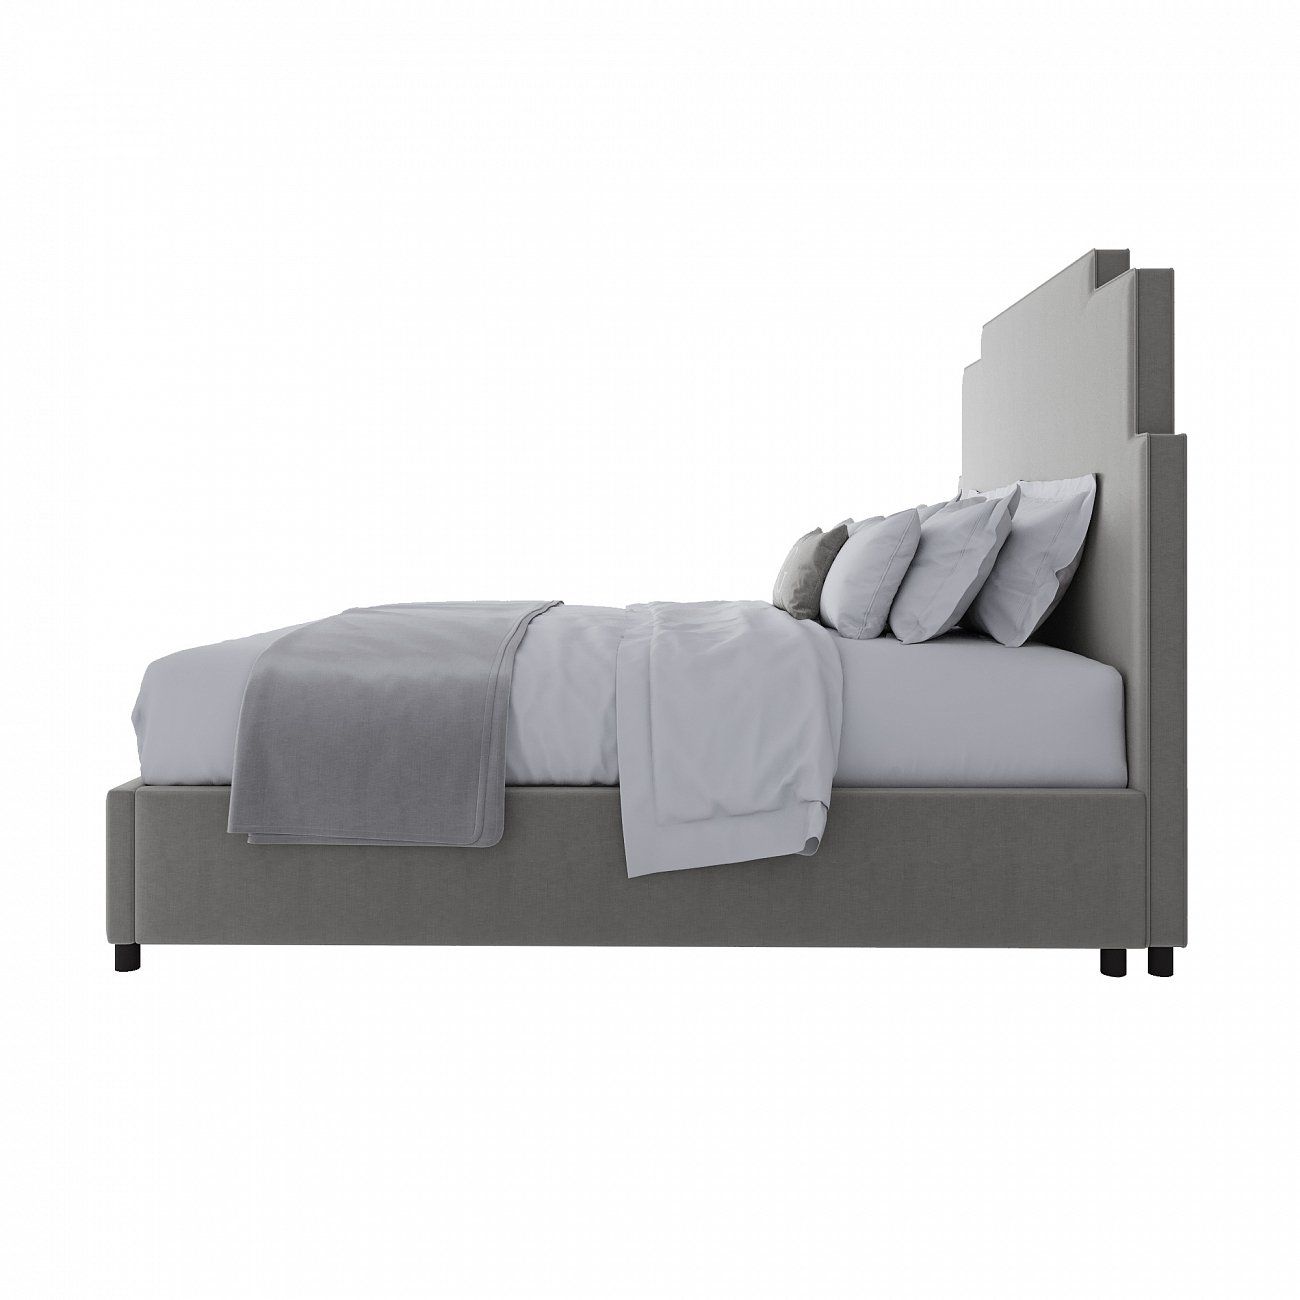 Double bed 180x200 grey Paxton Gray Linen